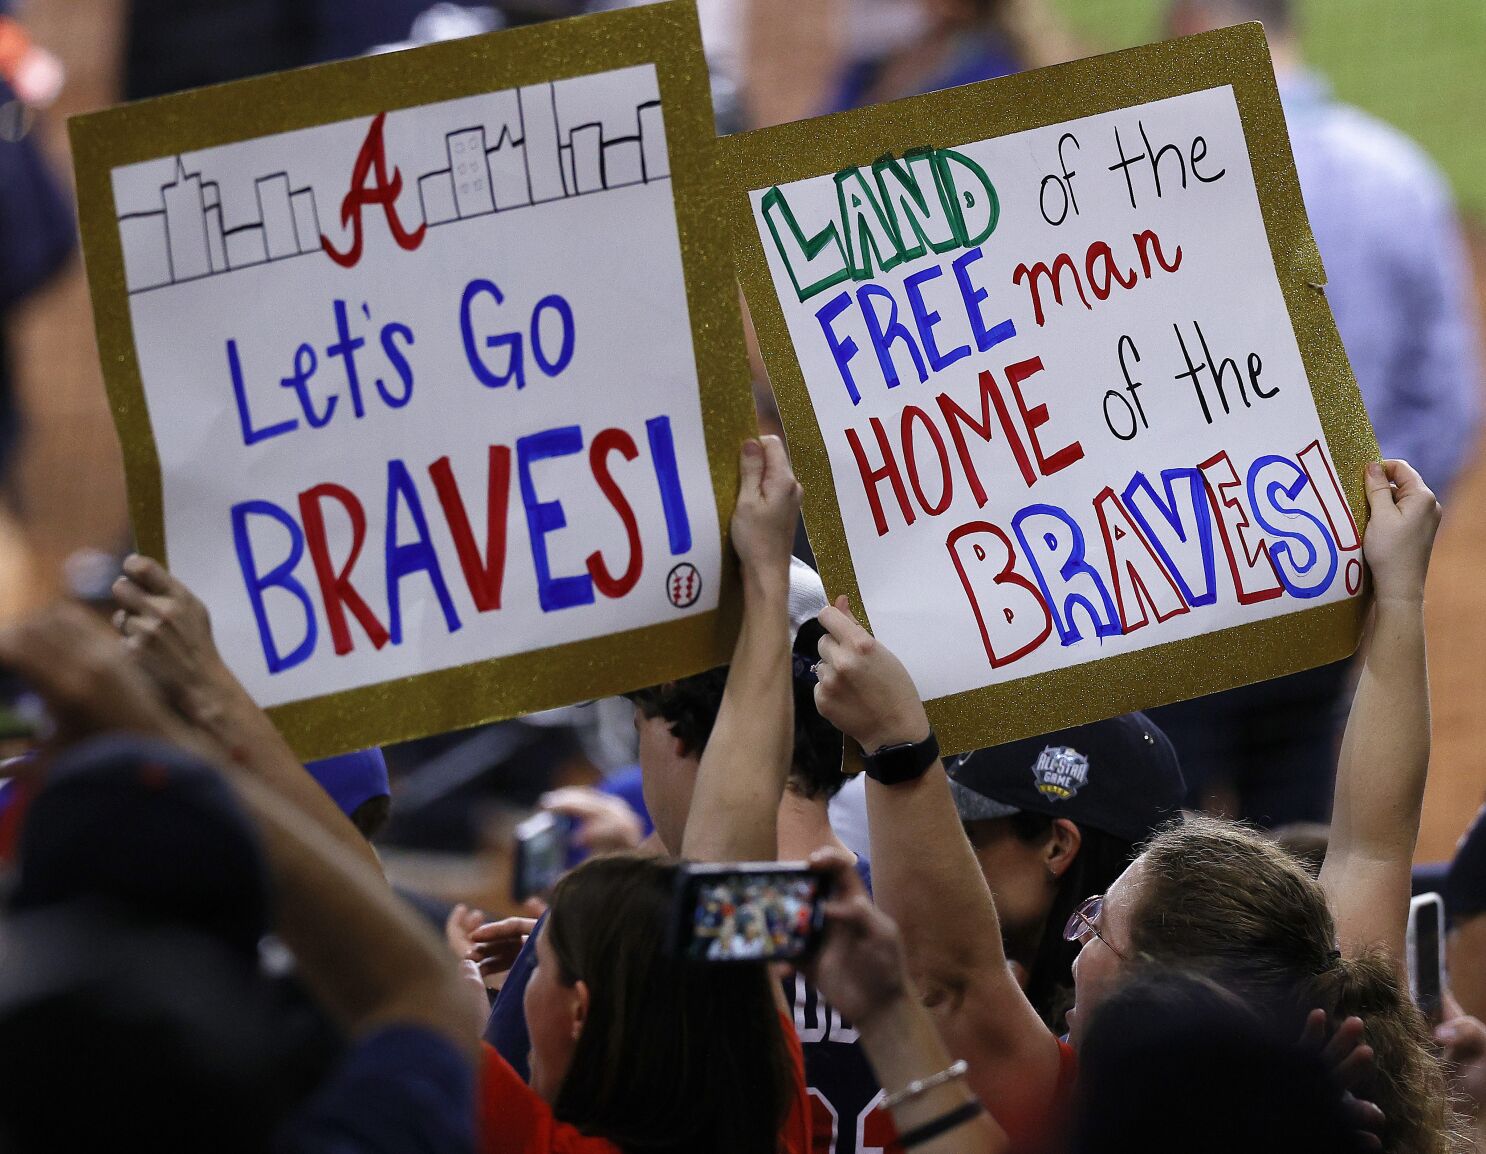 The best moments from the Braves' first World Series title in 26